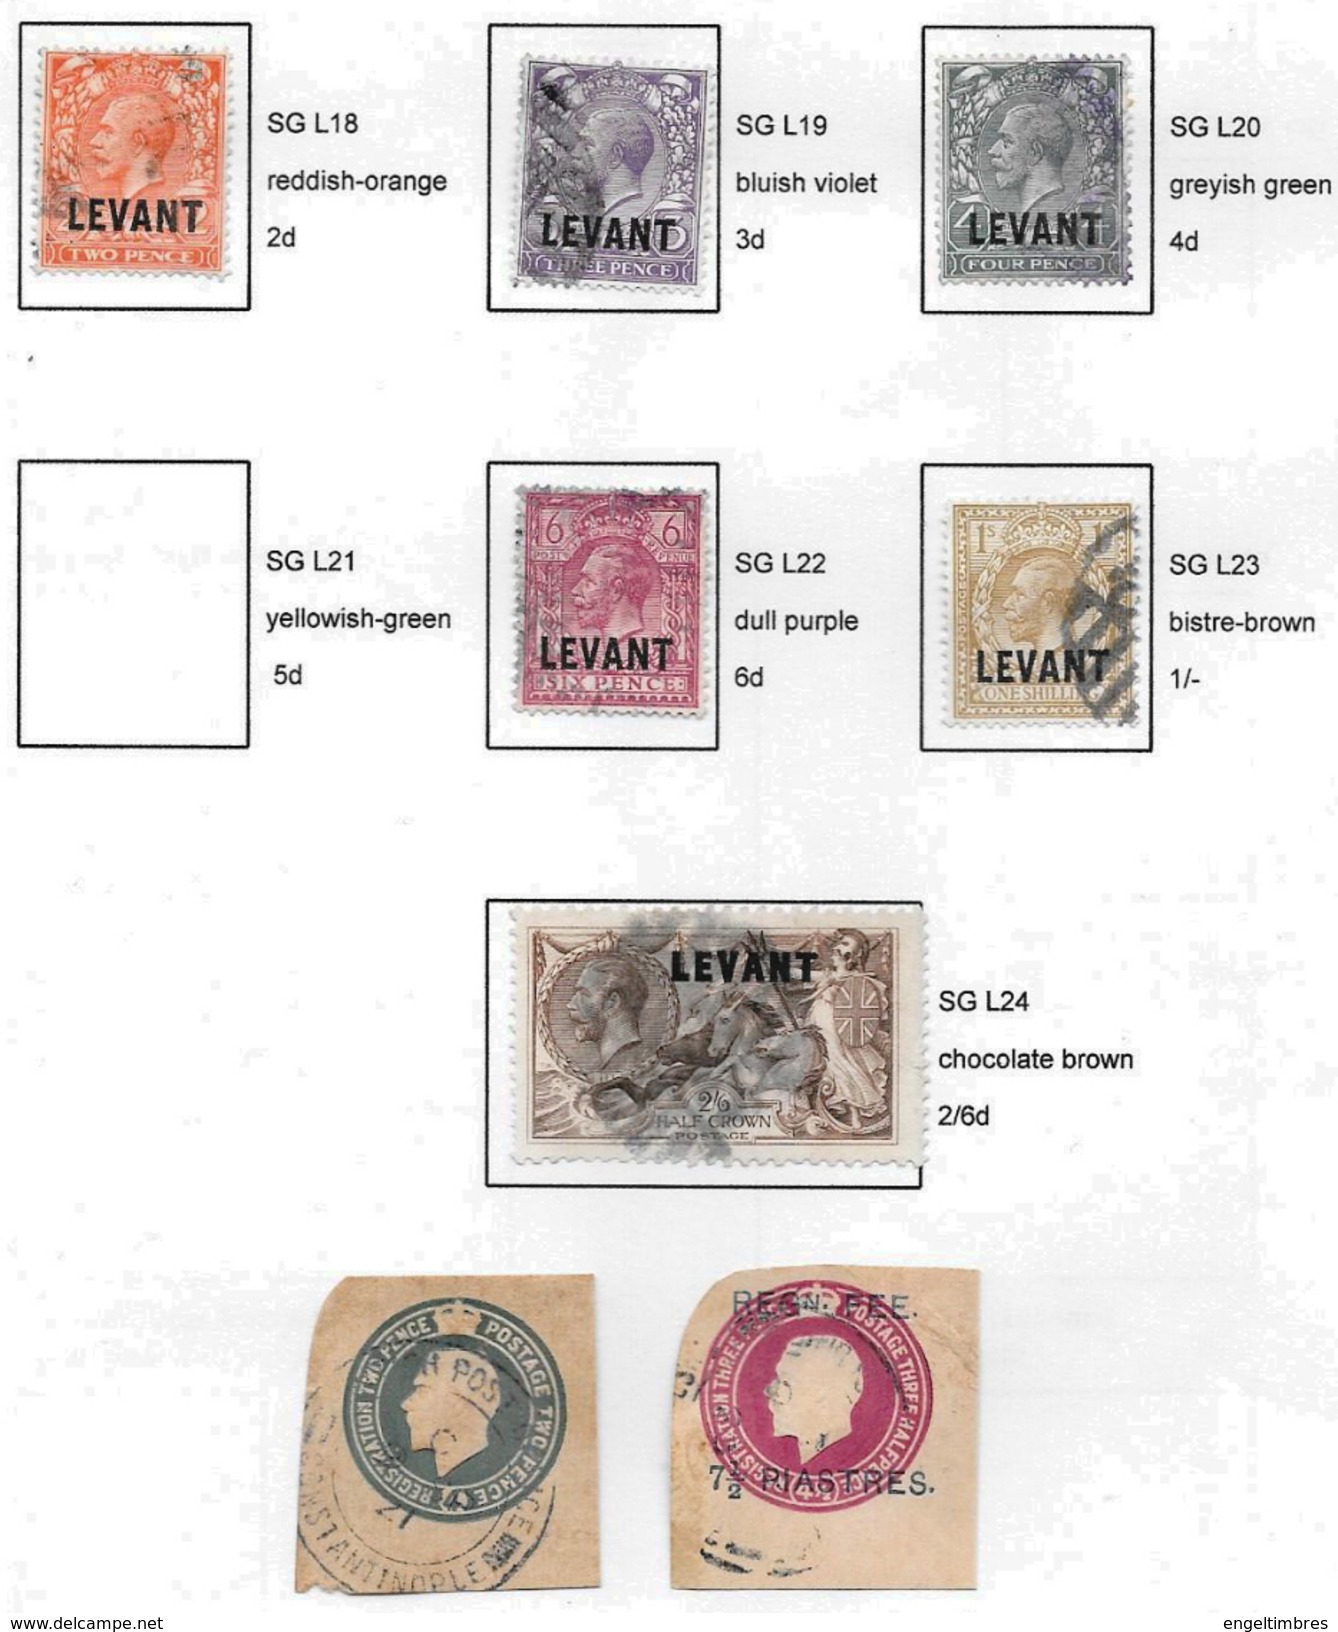 British LEVANT - 1921  George 5th  Overprinted  "LEVANT" SG L18 - L20 And L22 - L24  (6 Stamps) + Extras - USED - British Levant